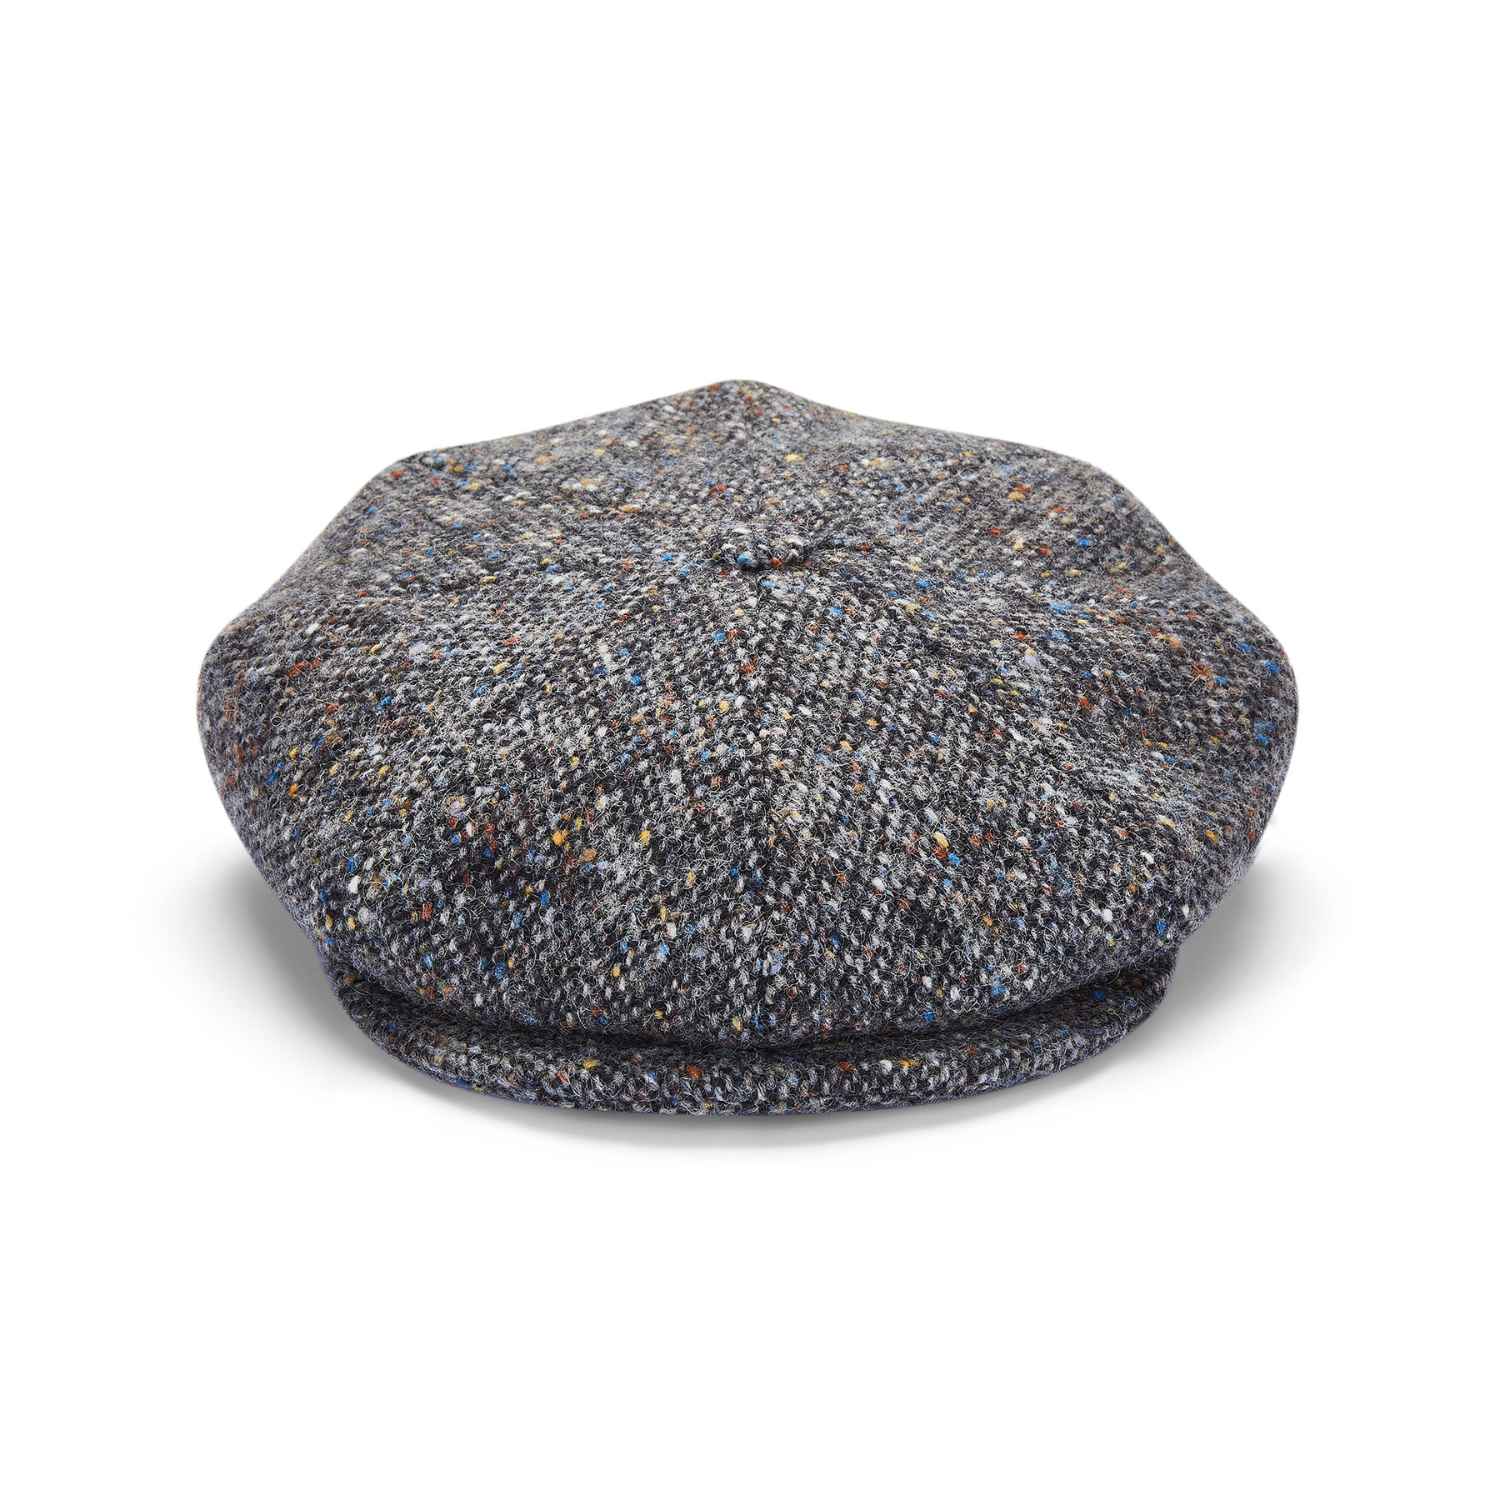 Front View | 8 Piece Baker Boy Hat by City Sport | Grey Speckled Donegal Tweed Cap |